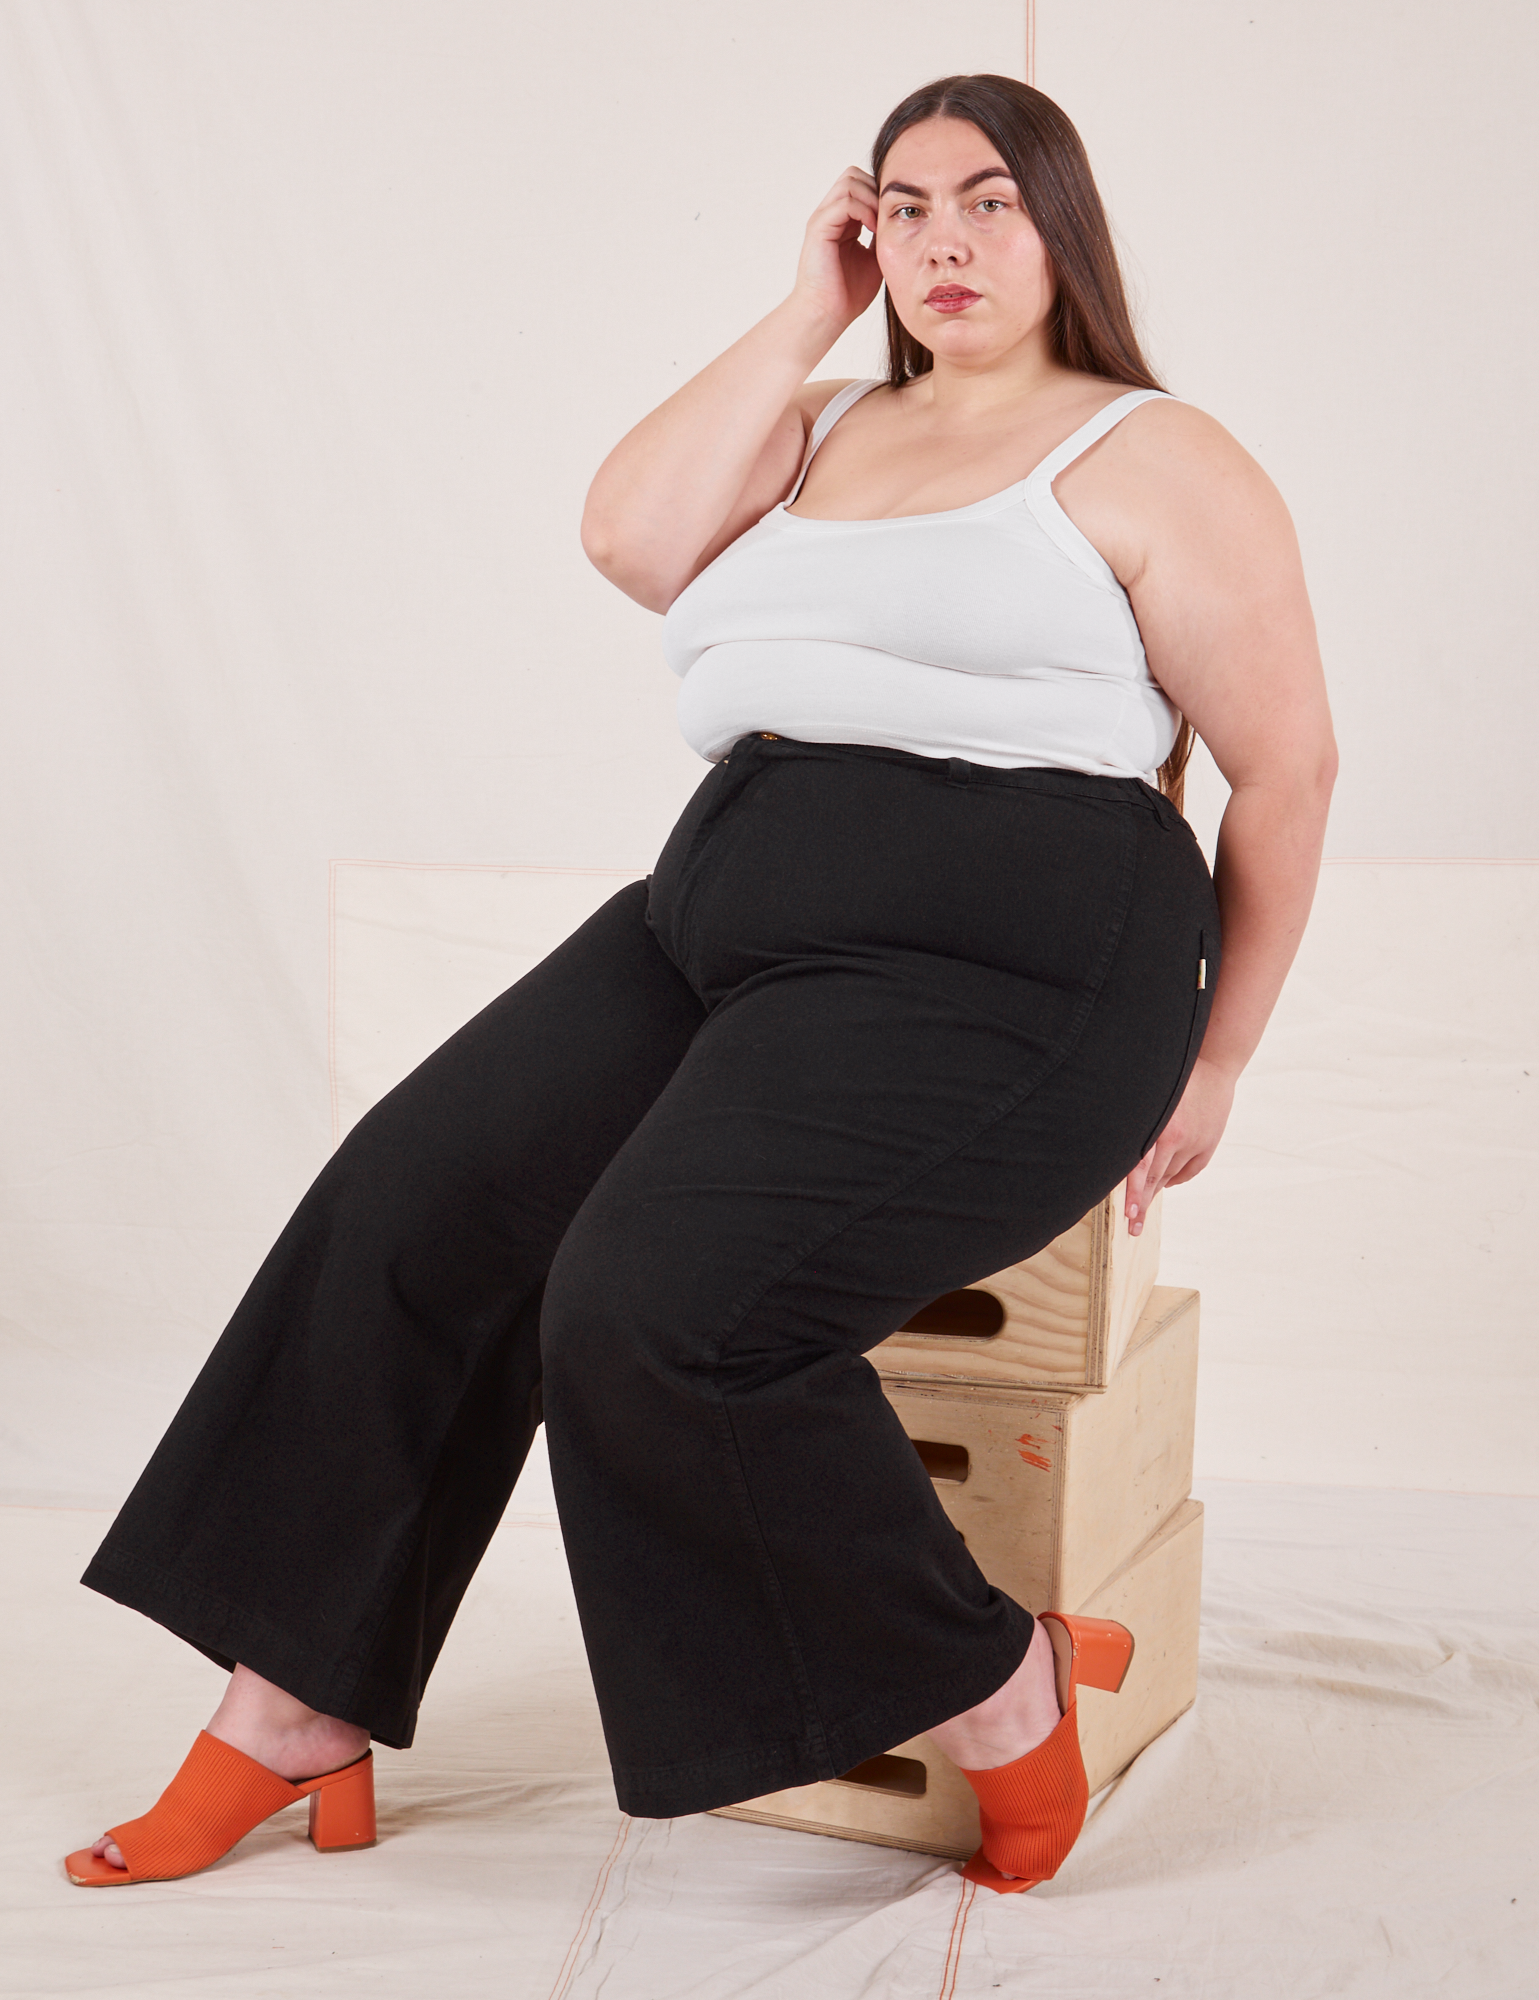 Marielena is wearing Bell Bottoms in Basic Black and Cropped Cami in vintage tee off-white. She is sitting on a stack of wooden crates.